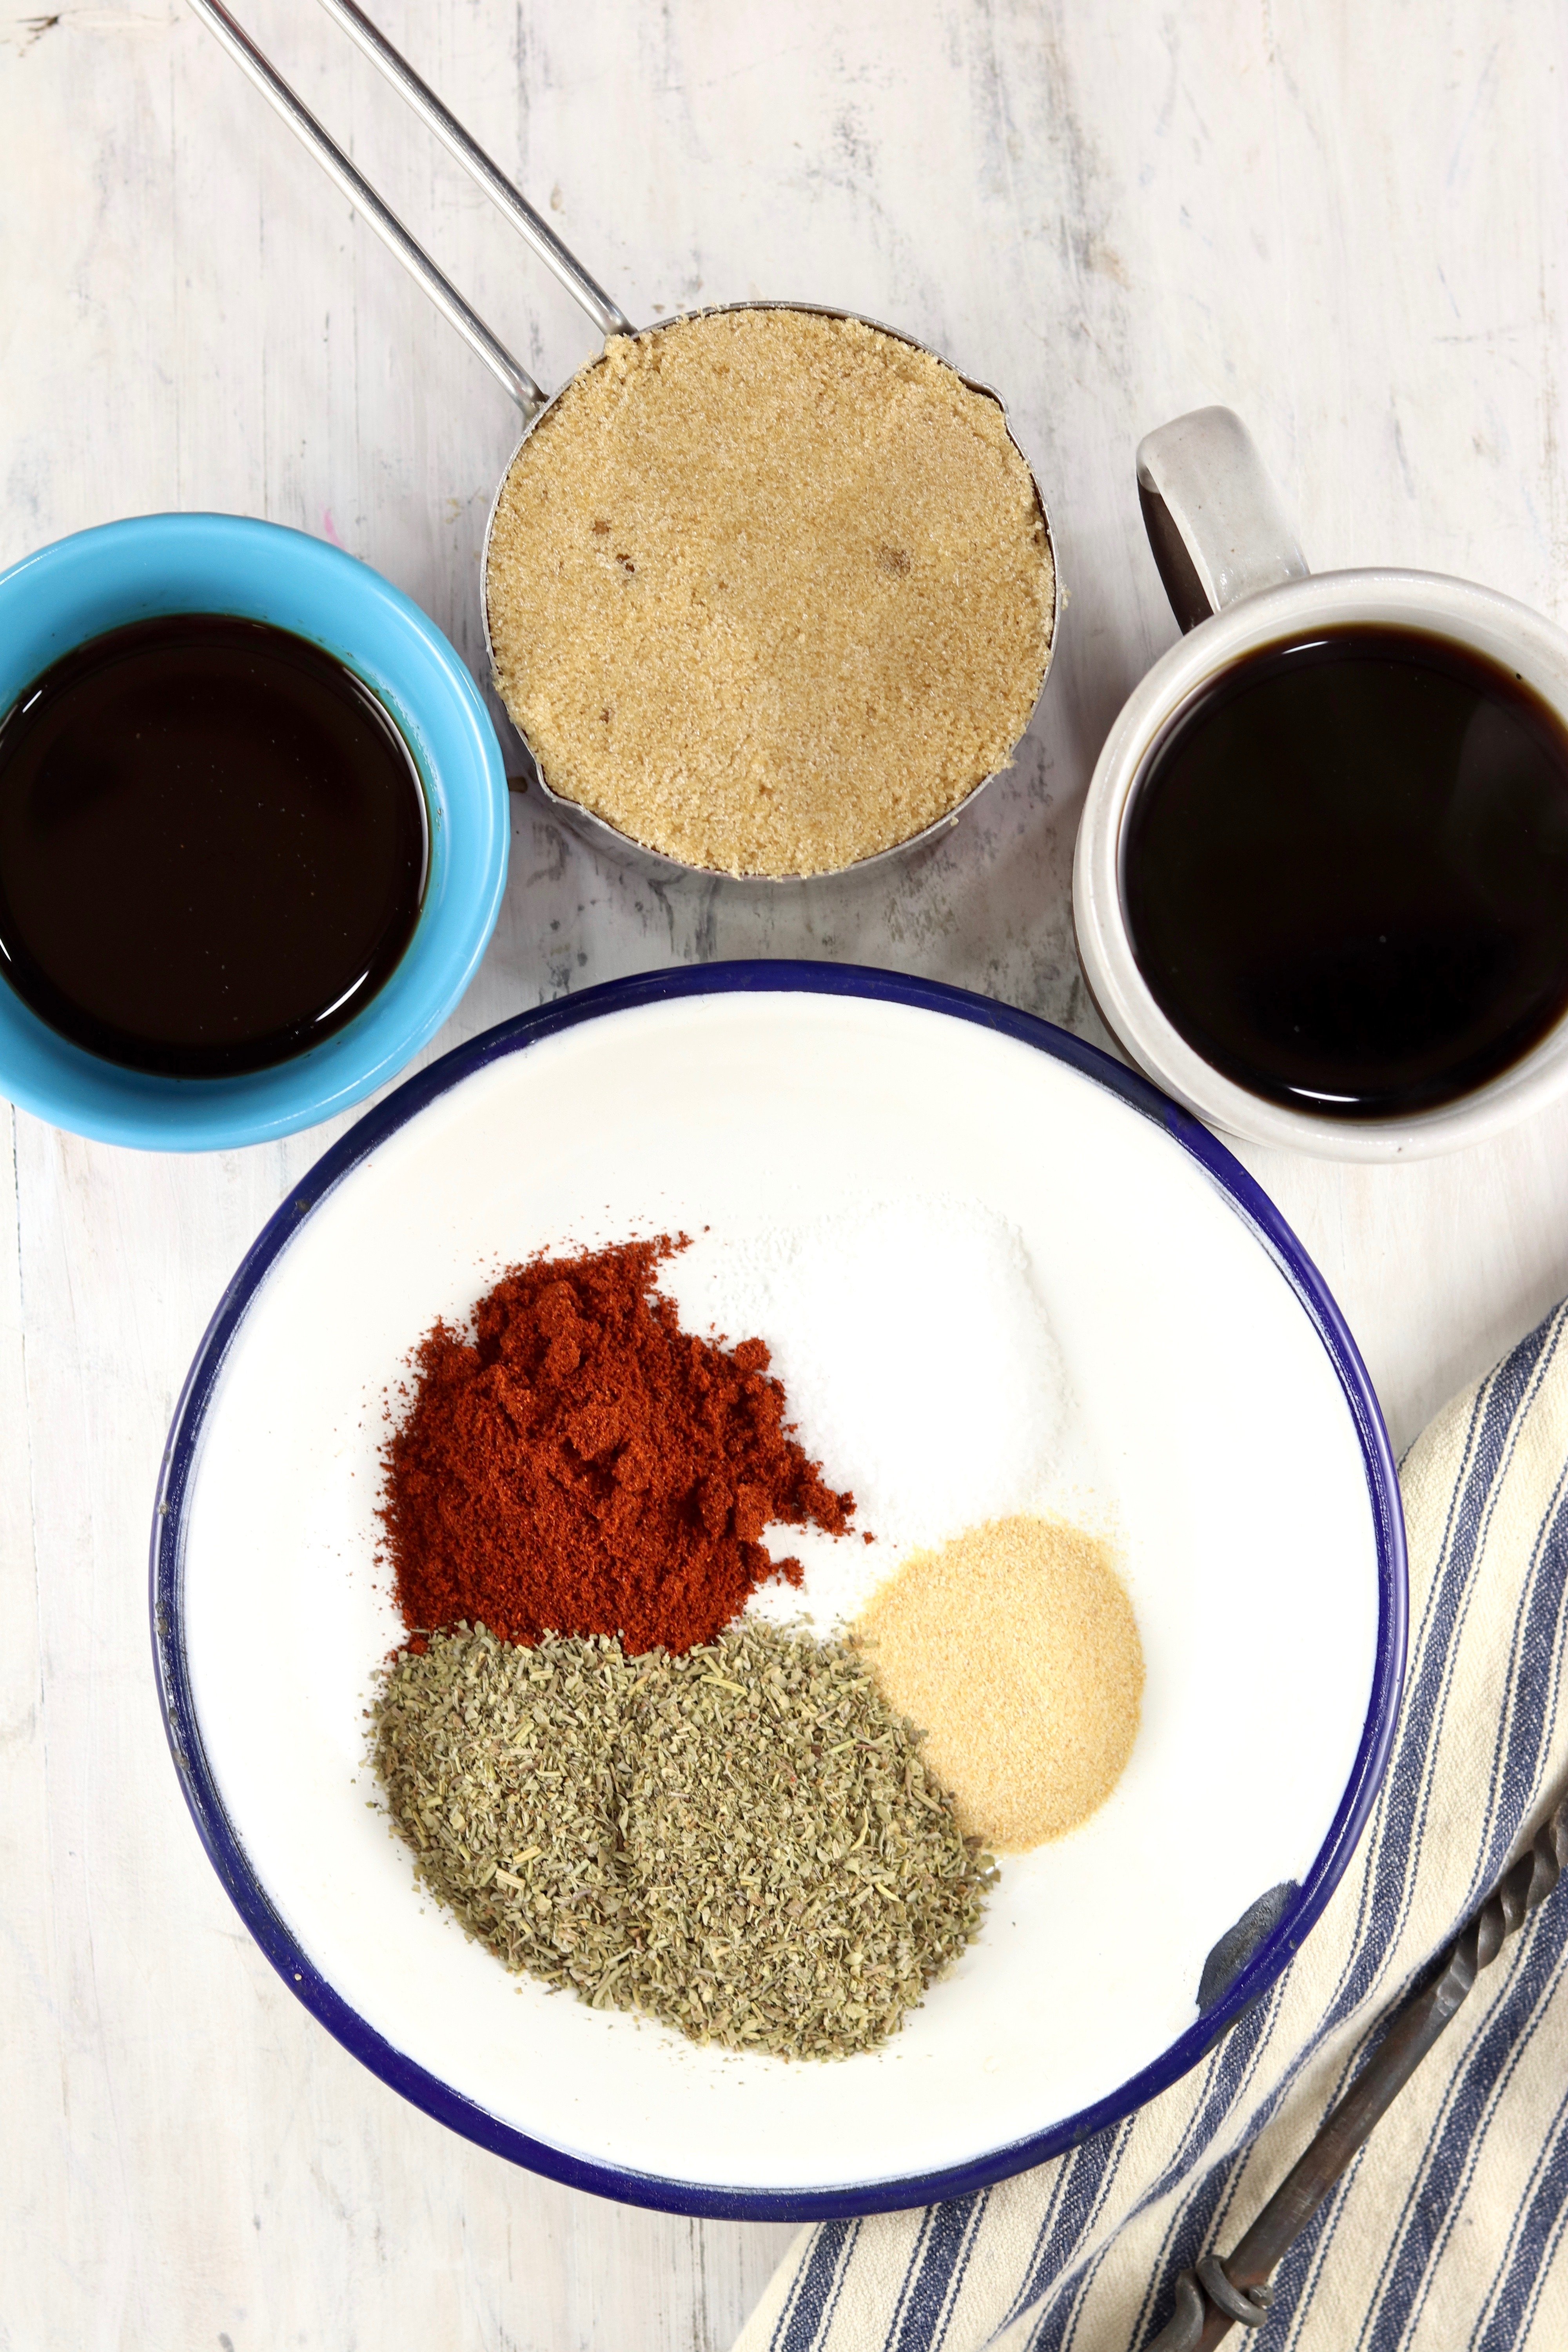 Ingredients for coffee marinade